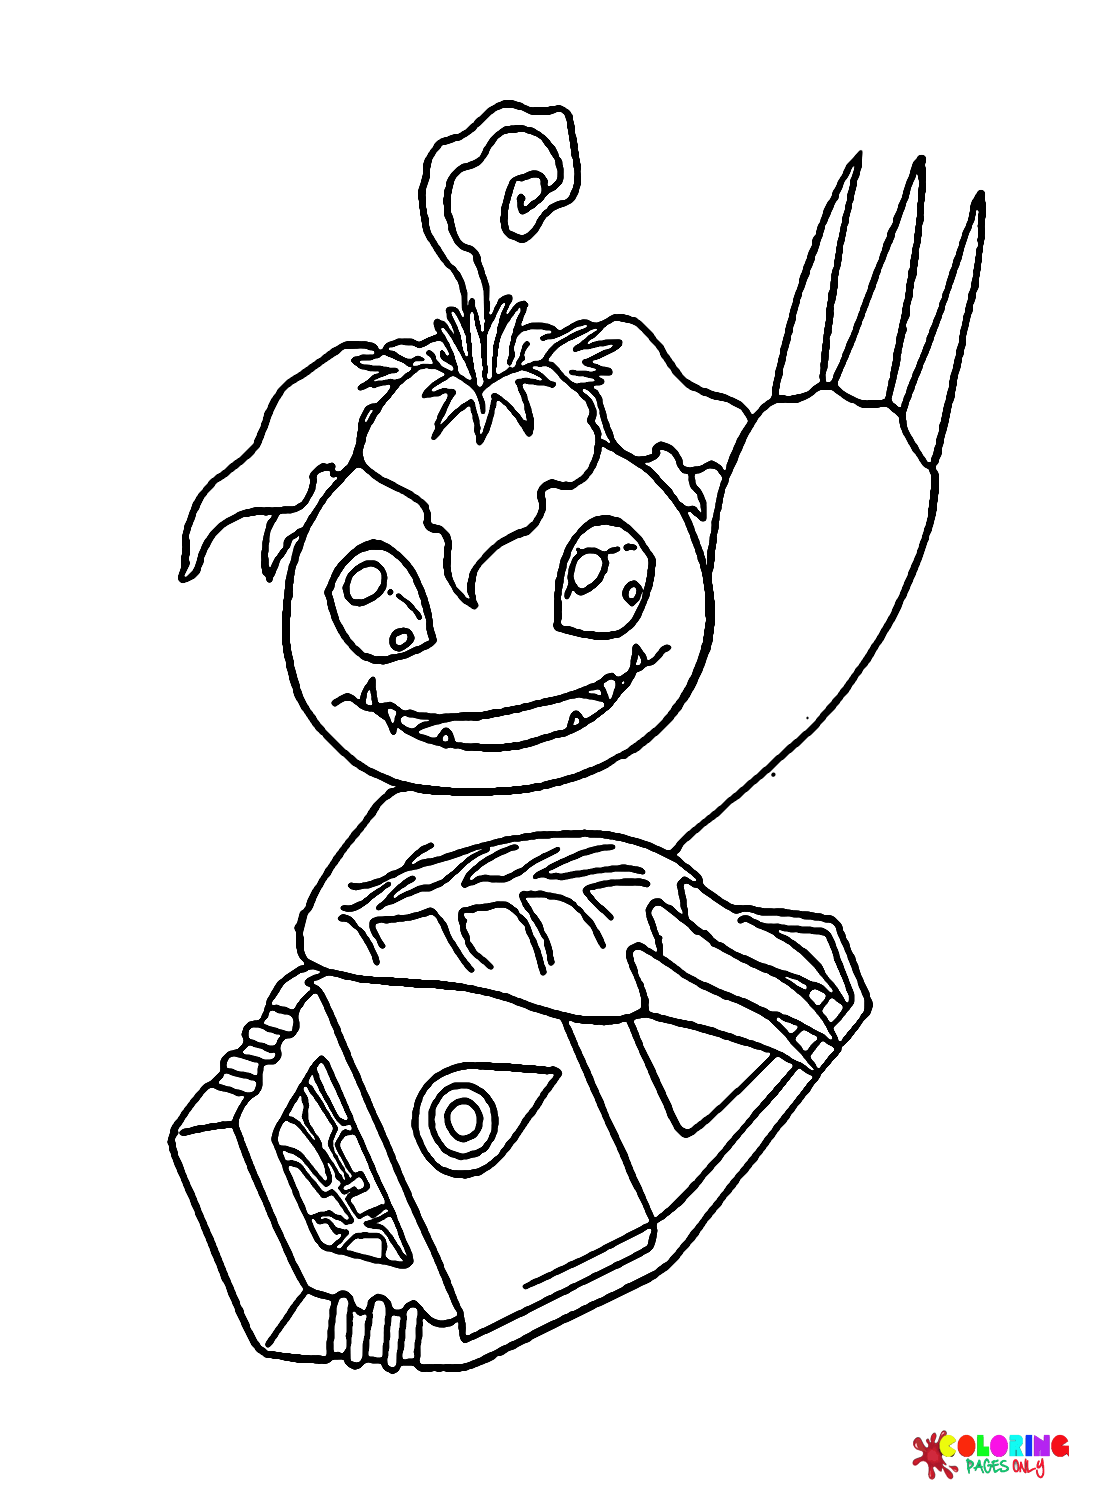 Palmon from Digimon Coloring Page